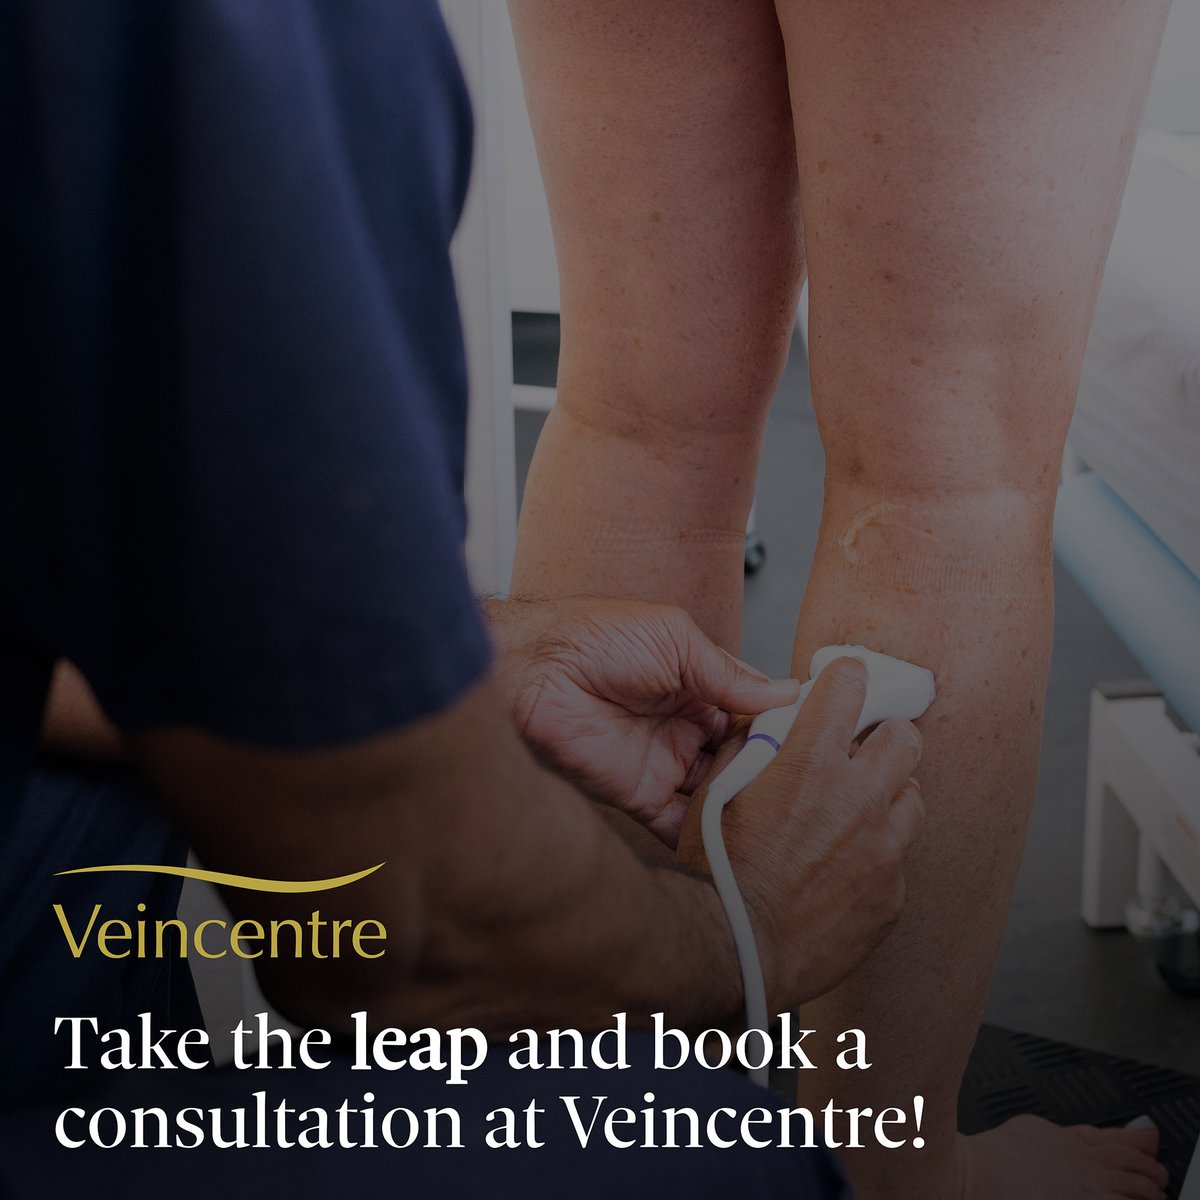 Are your vein problems affecting your day-to-day life? Take the leap and book a consultation with one of our vascular consultants.

✔️Colour duplex ultrasound scan
✔️Immediate diagnosis
✔️20+ years' experience

#veindisease #veinclinic #privatehealthcare #veinspecialists